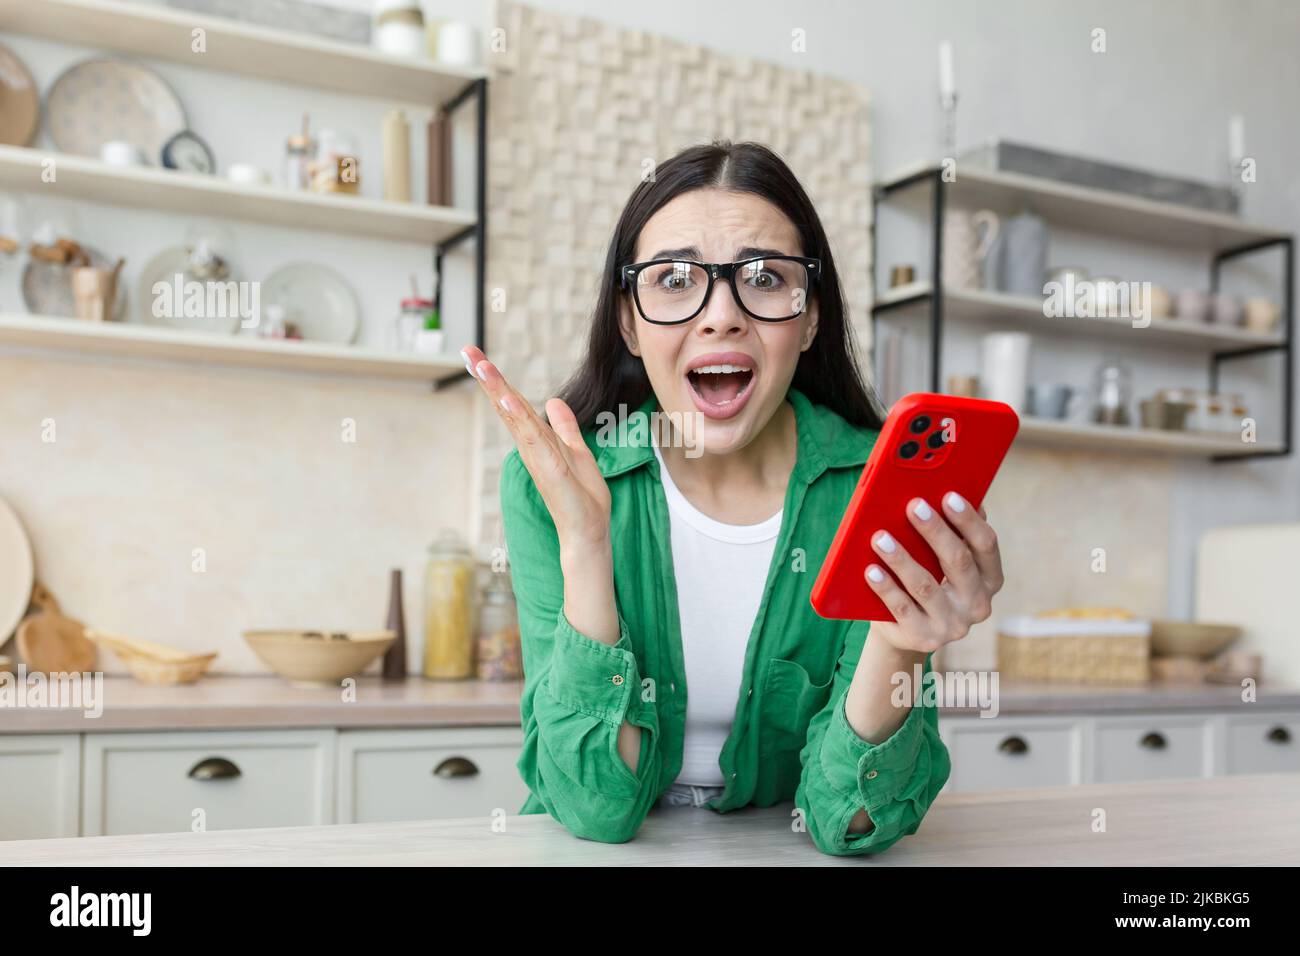 Shocked young woman looking at smartphone screen, feeling confused getting message with unbelievable news. Surprised millennial lady getting unexpected online lottery win notification at home. Stock Photo